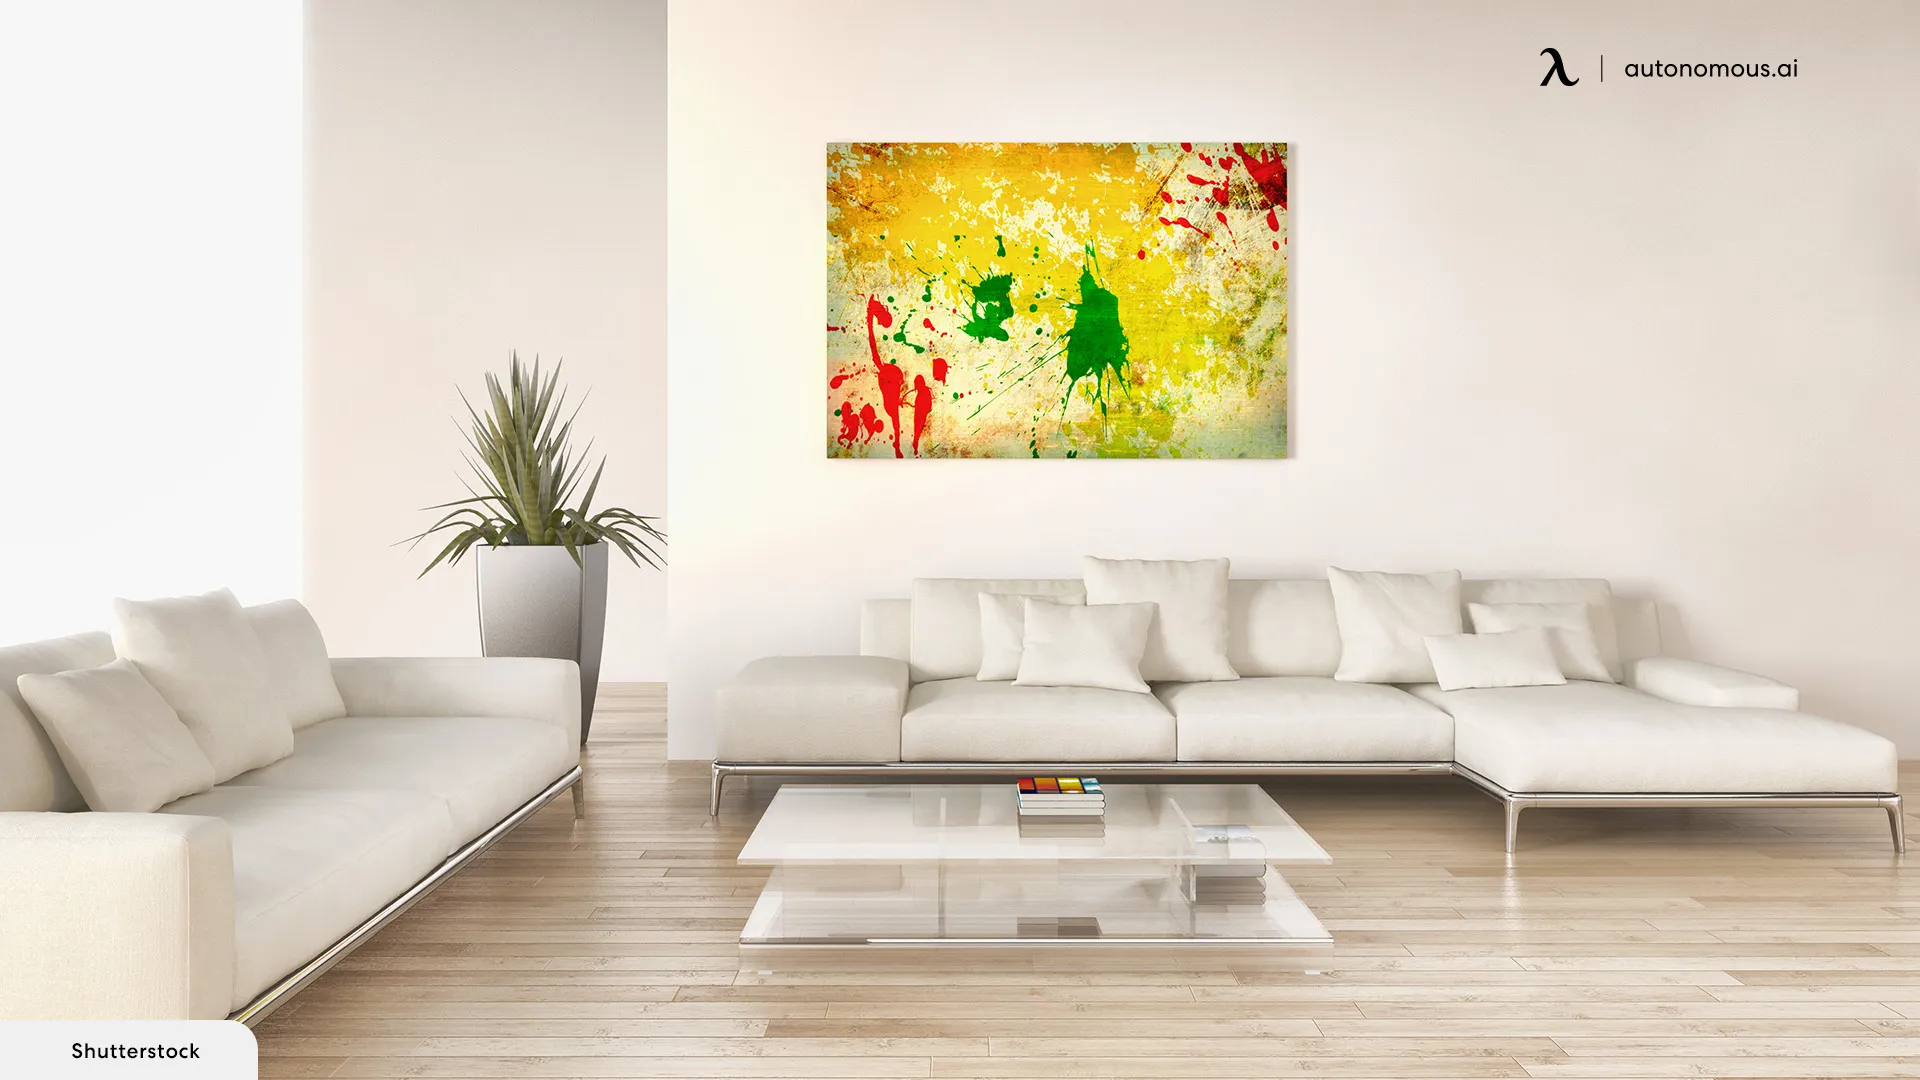 Purchase or Commission Artwork - white room décor ideas